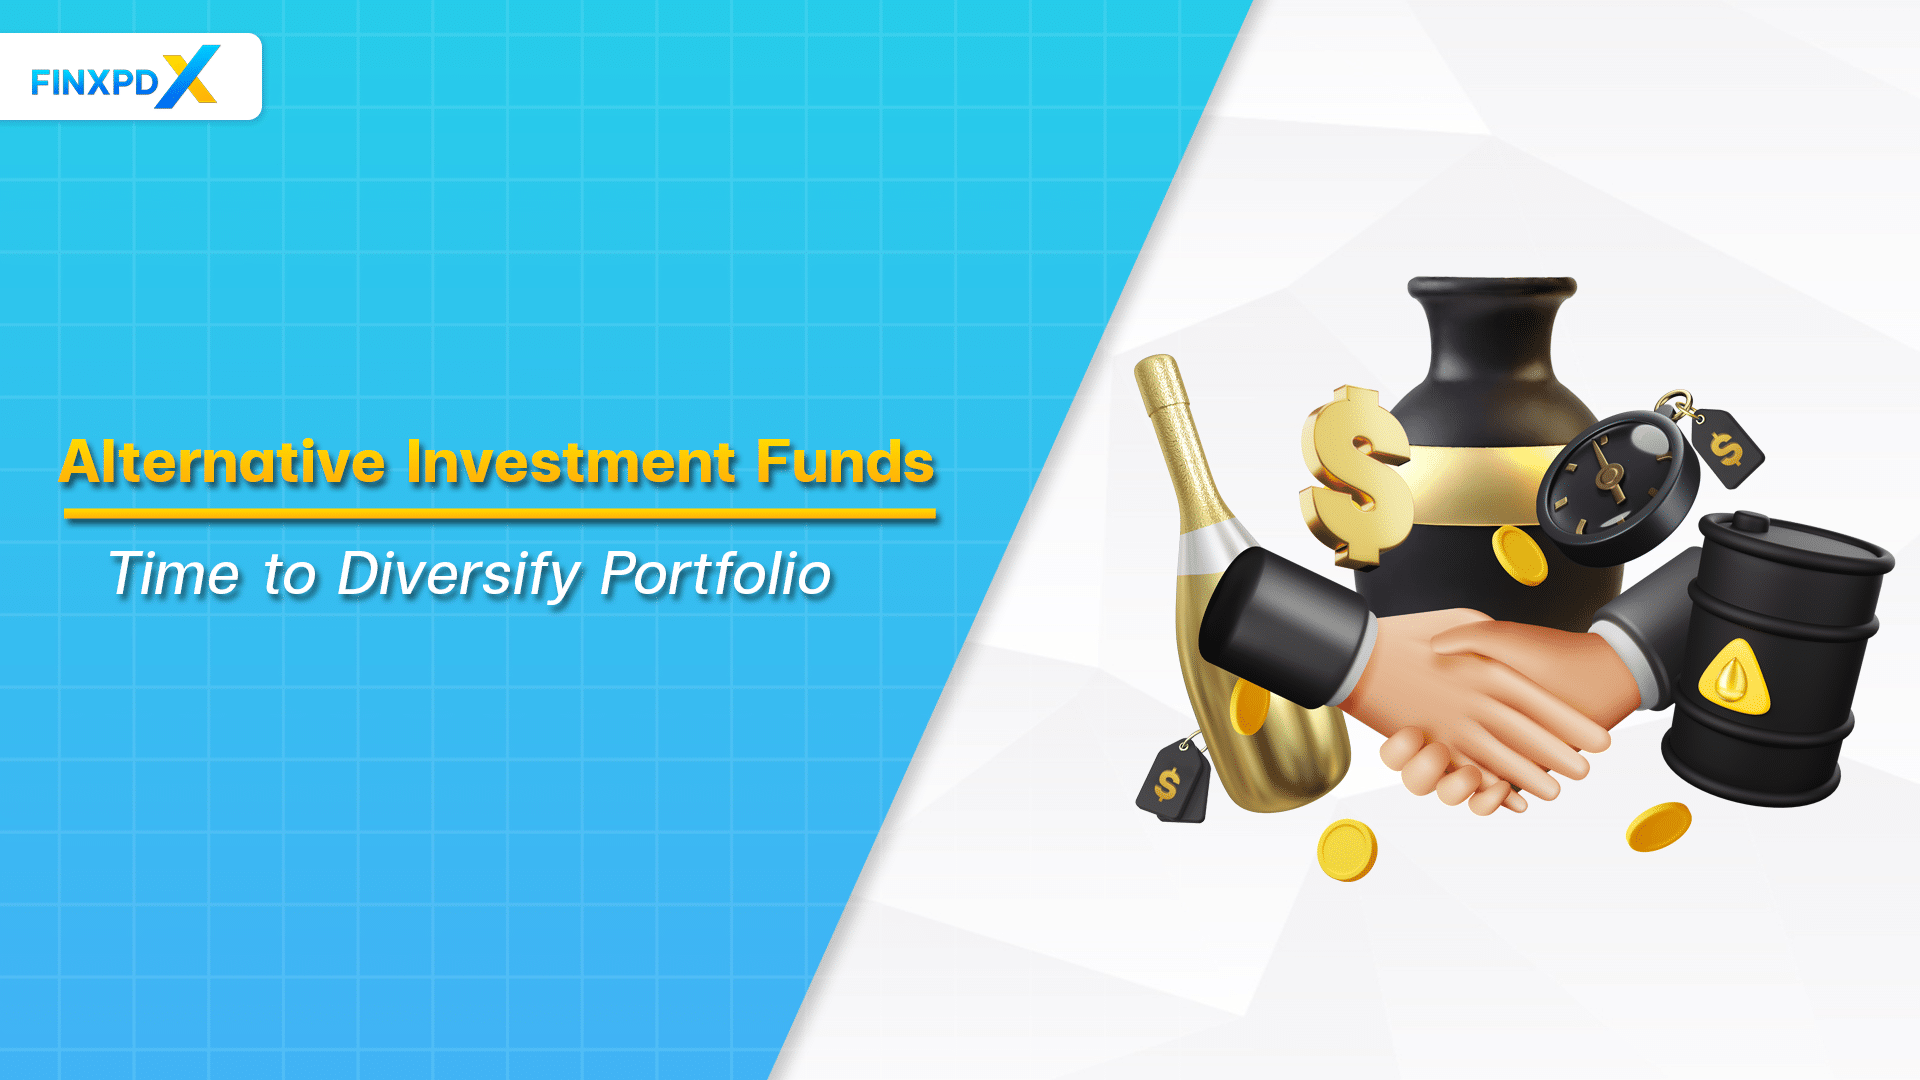 Alternative investment funds